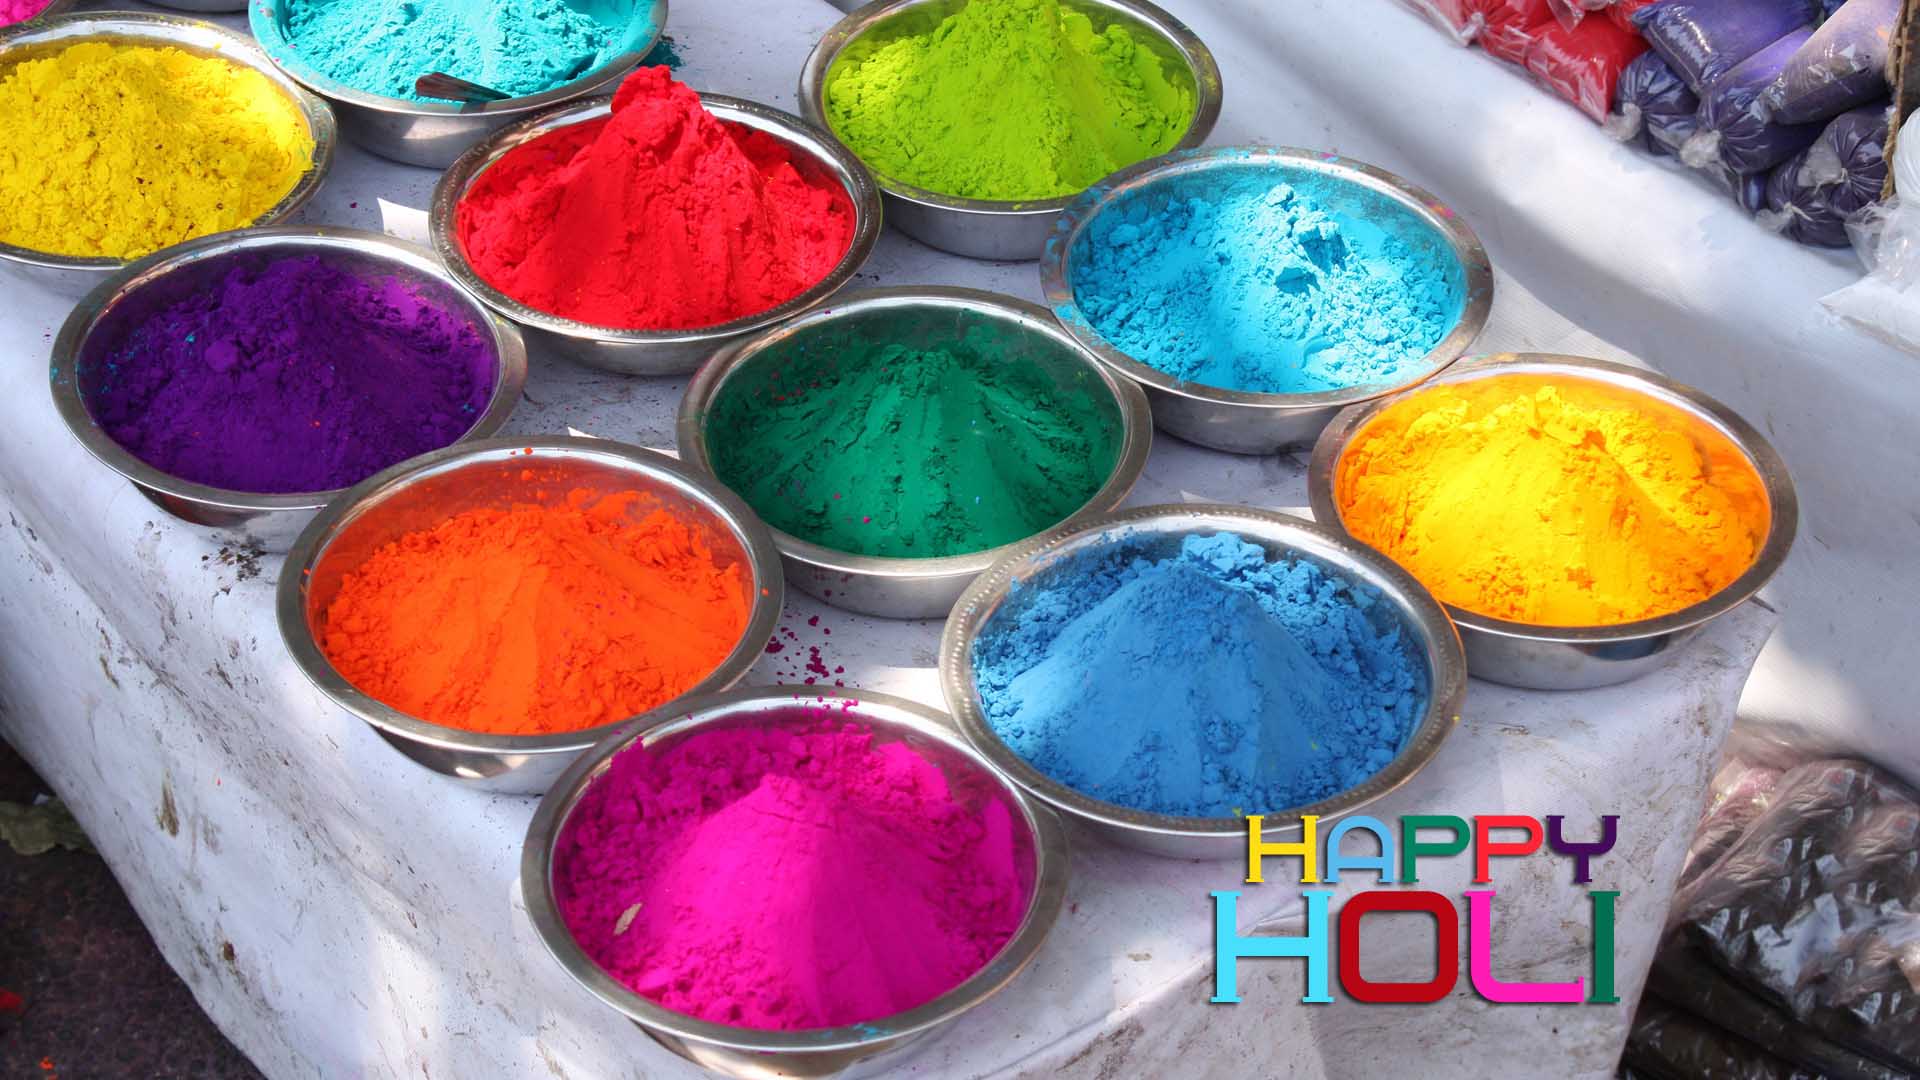 Best and Latest Happy Holi 2016 Pic